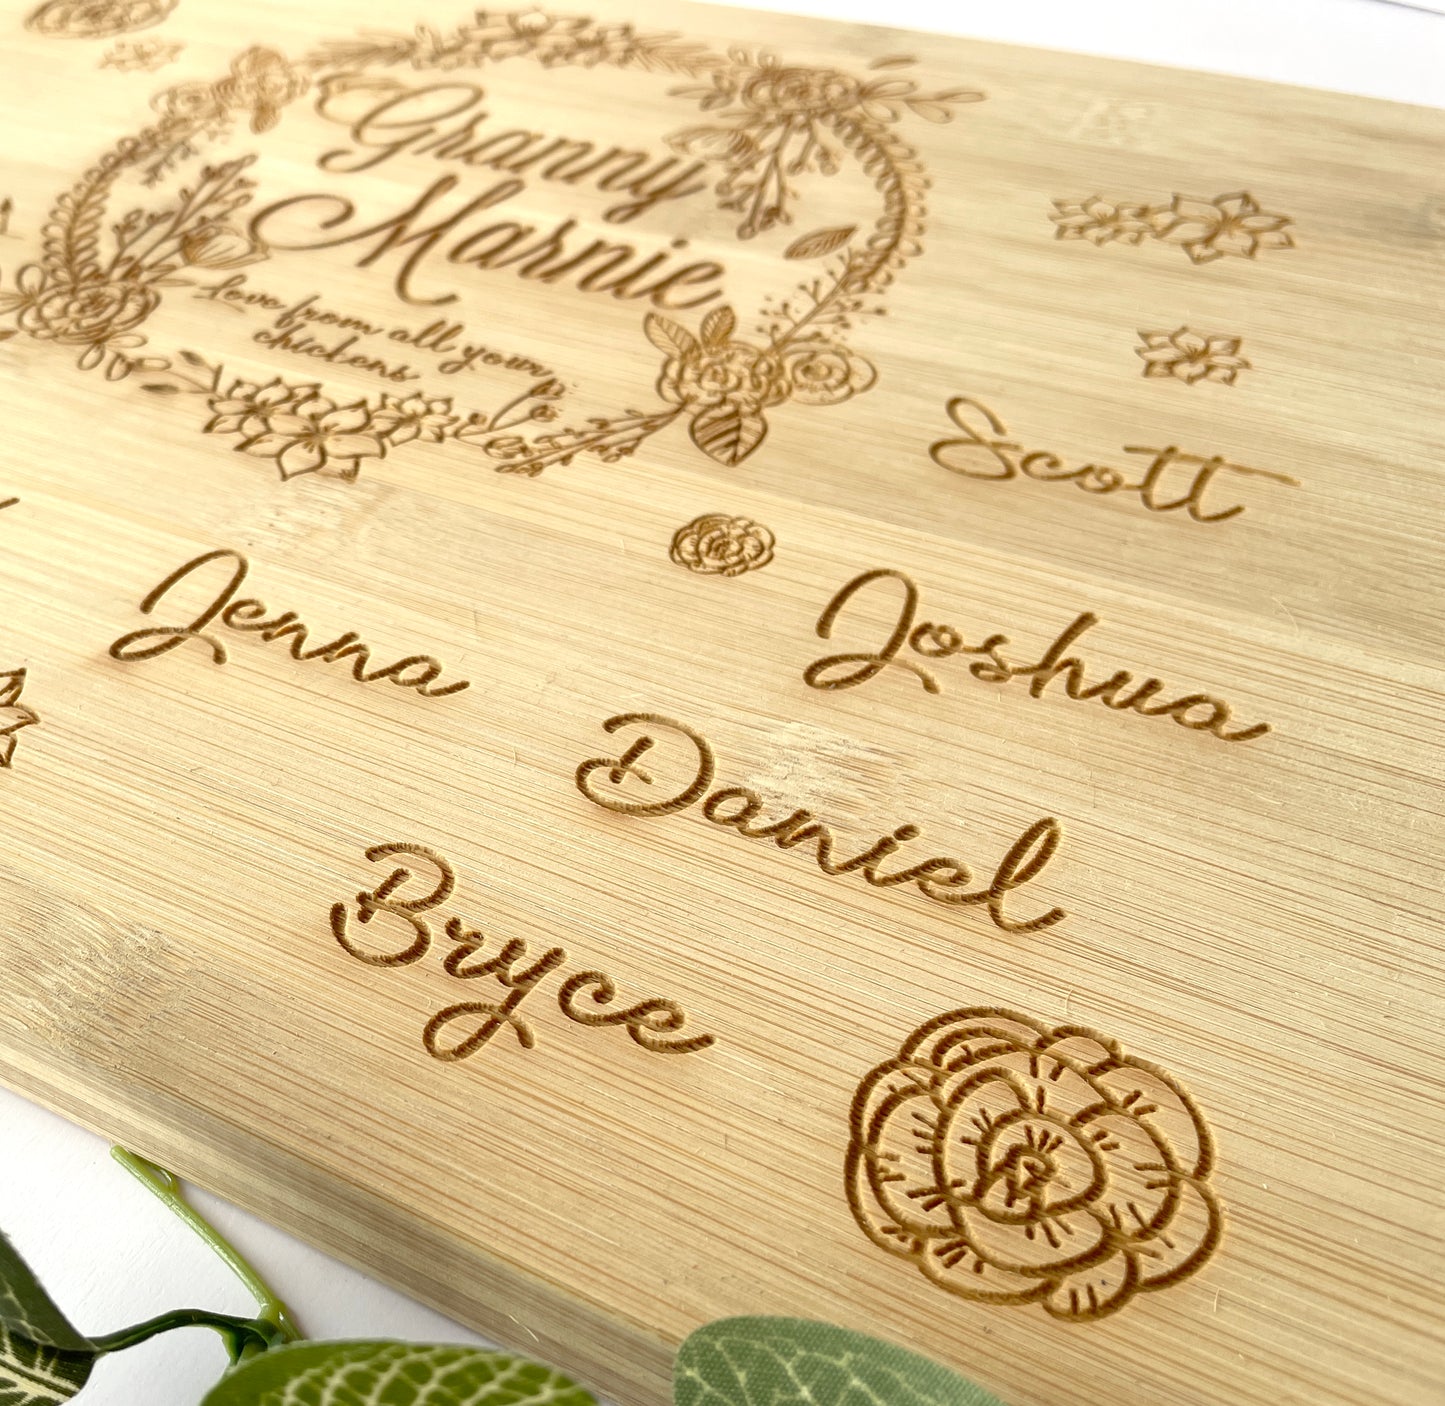 Personalized Wreath cutting board with names engraved around board